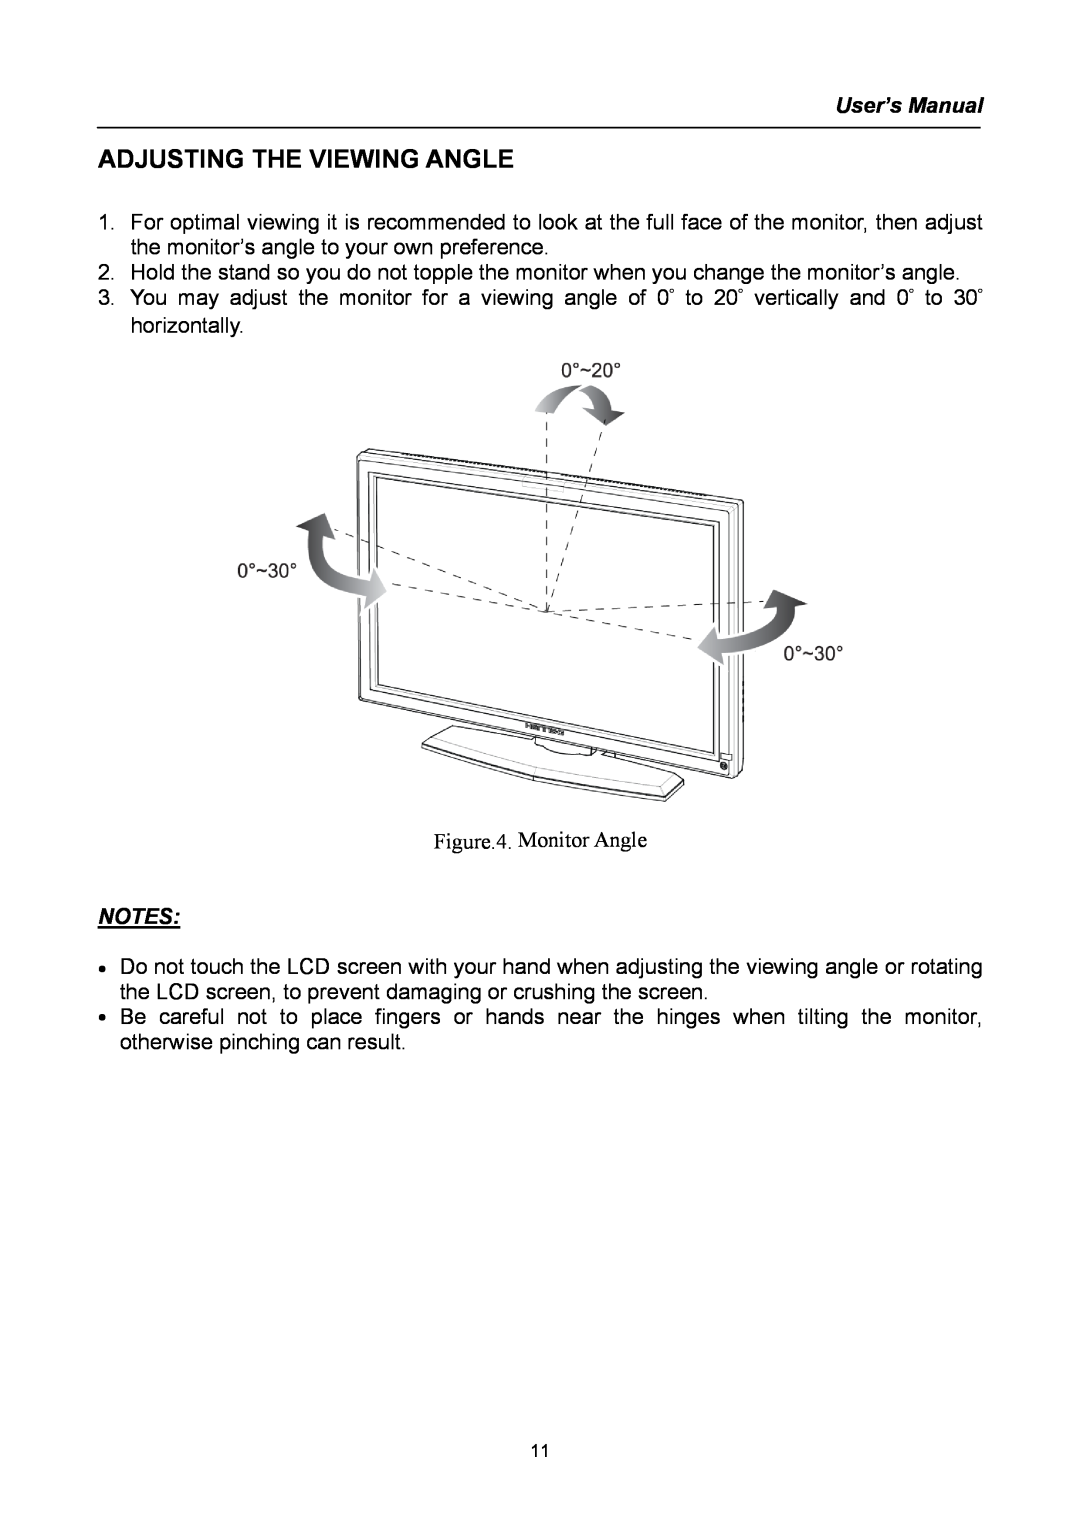 Hanns.G HG281 user manual Adjusting The Viewing Angle, Figure.4. Monitor Angle, User’s Manual 